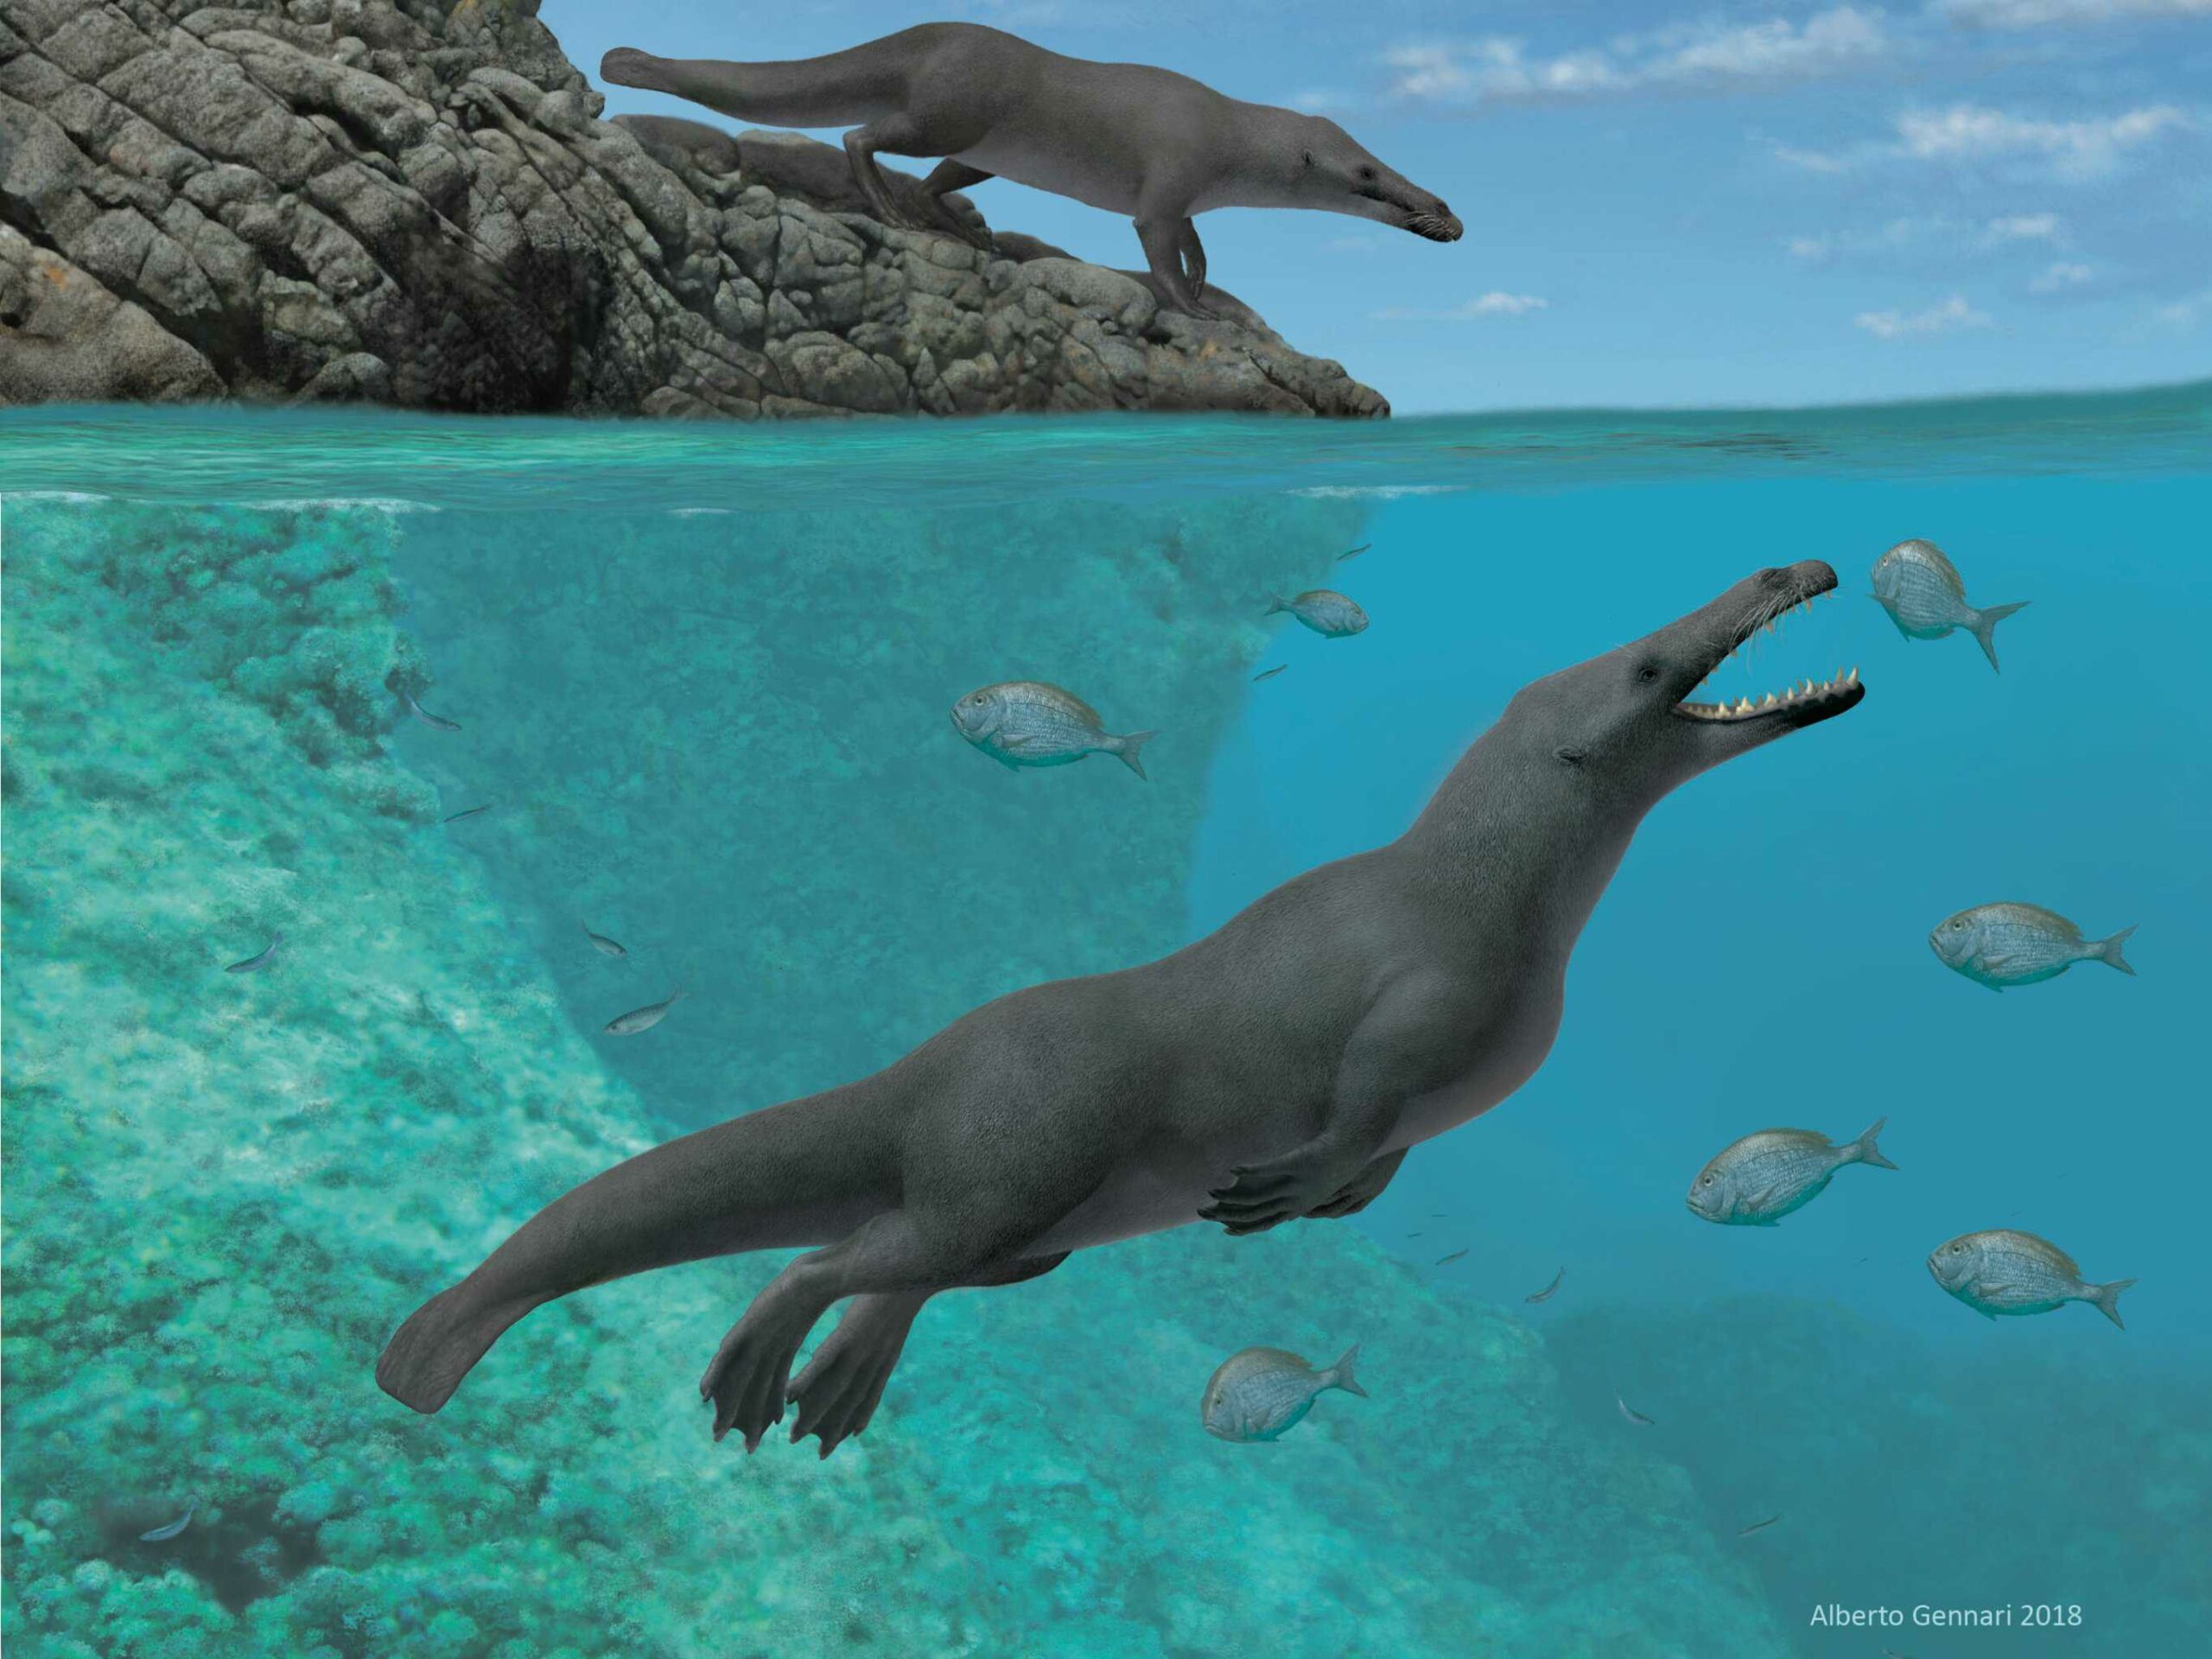 Four-legged prehistoric whale fossil with webbed feet found in Peru 1